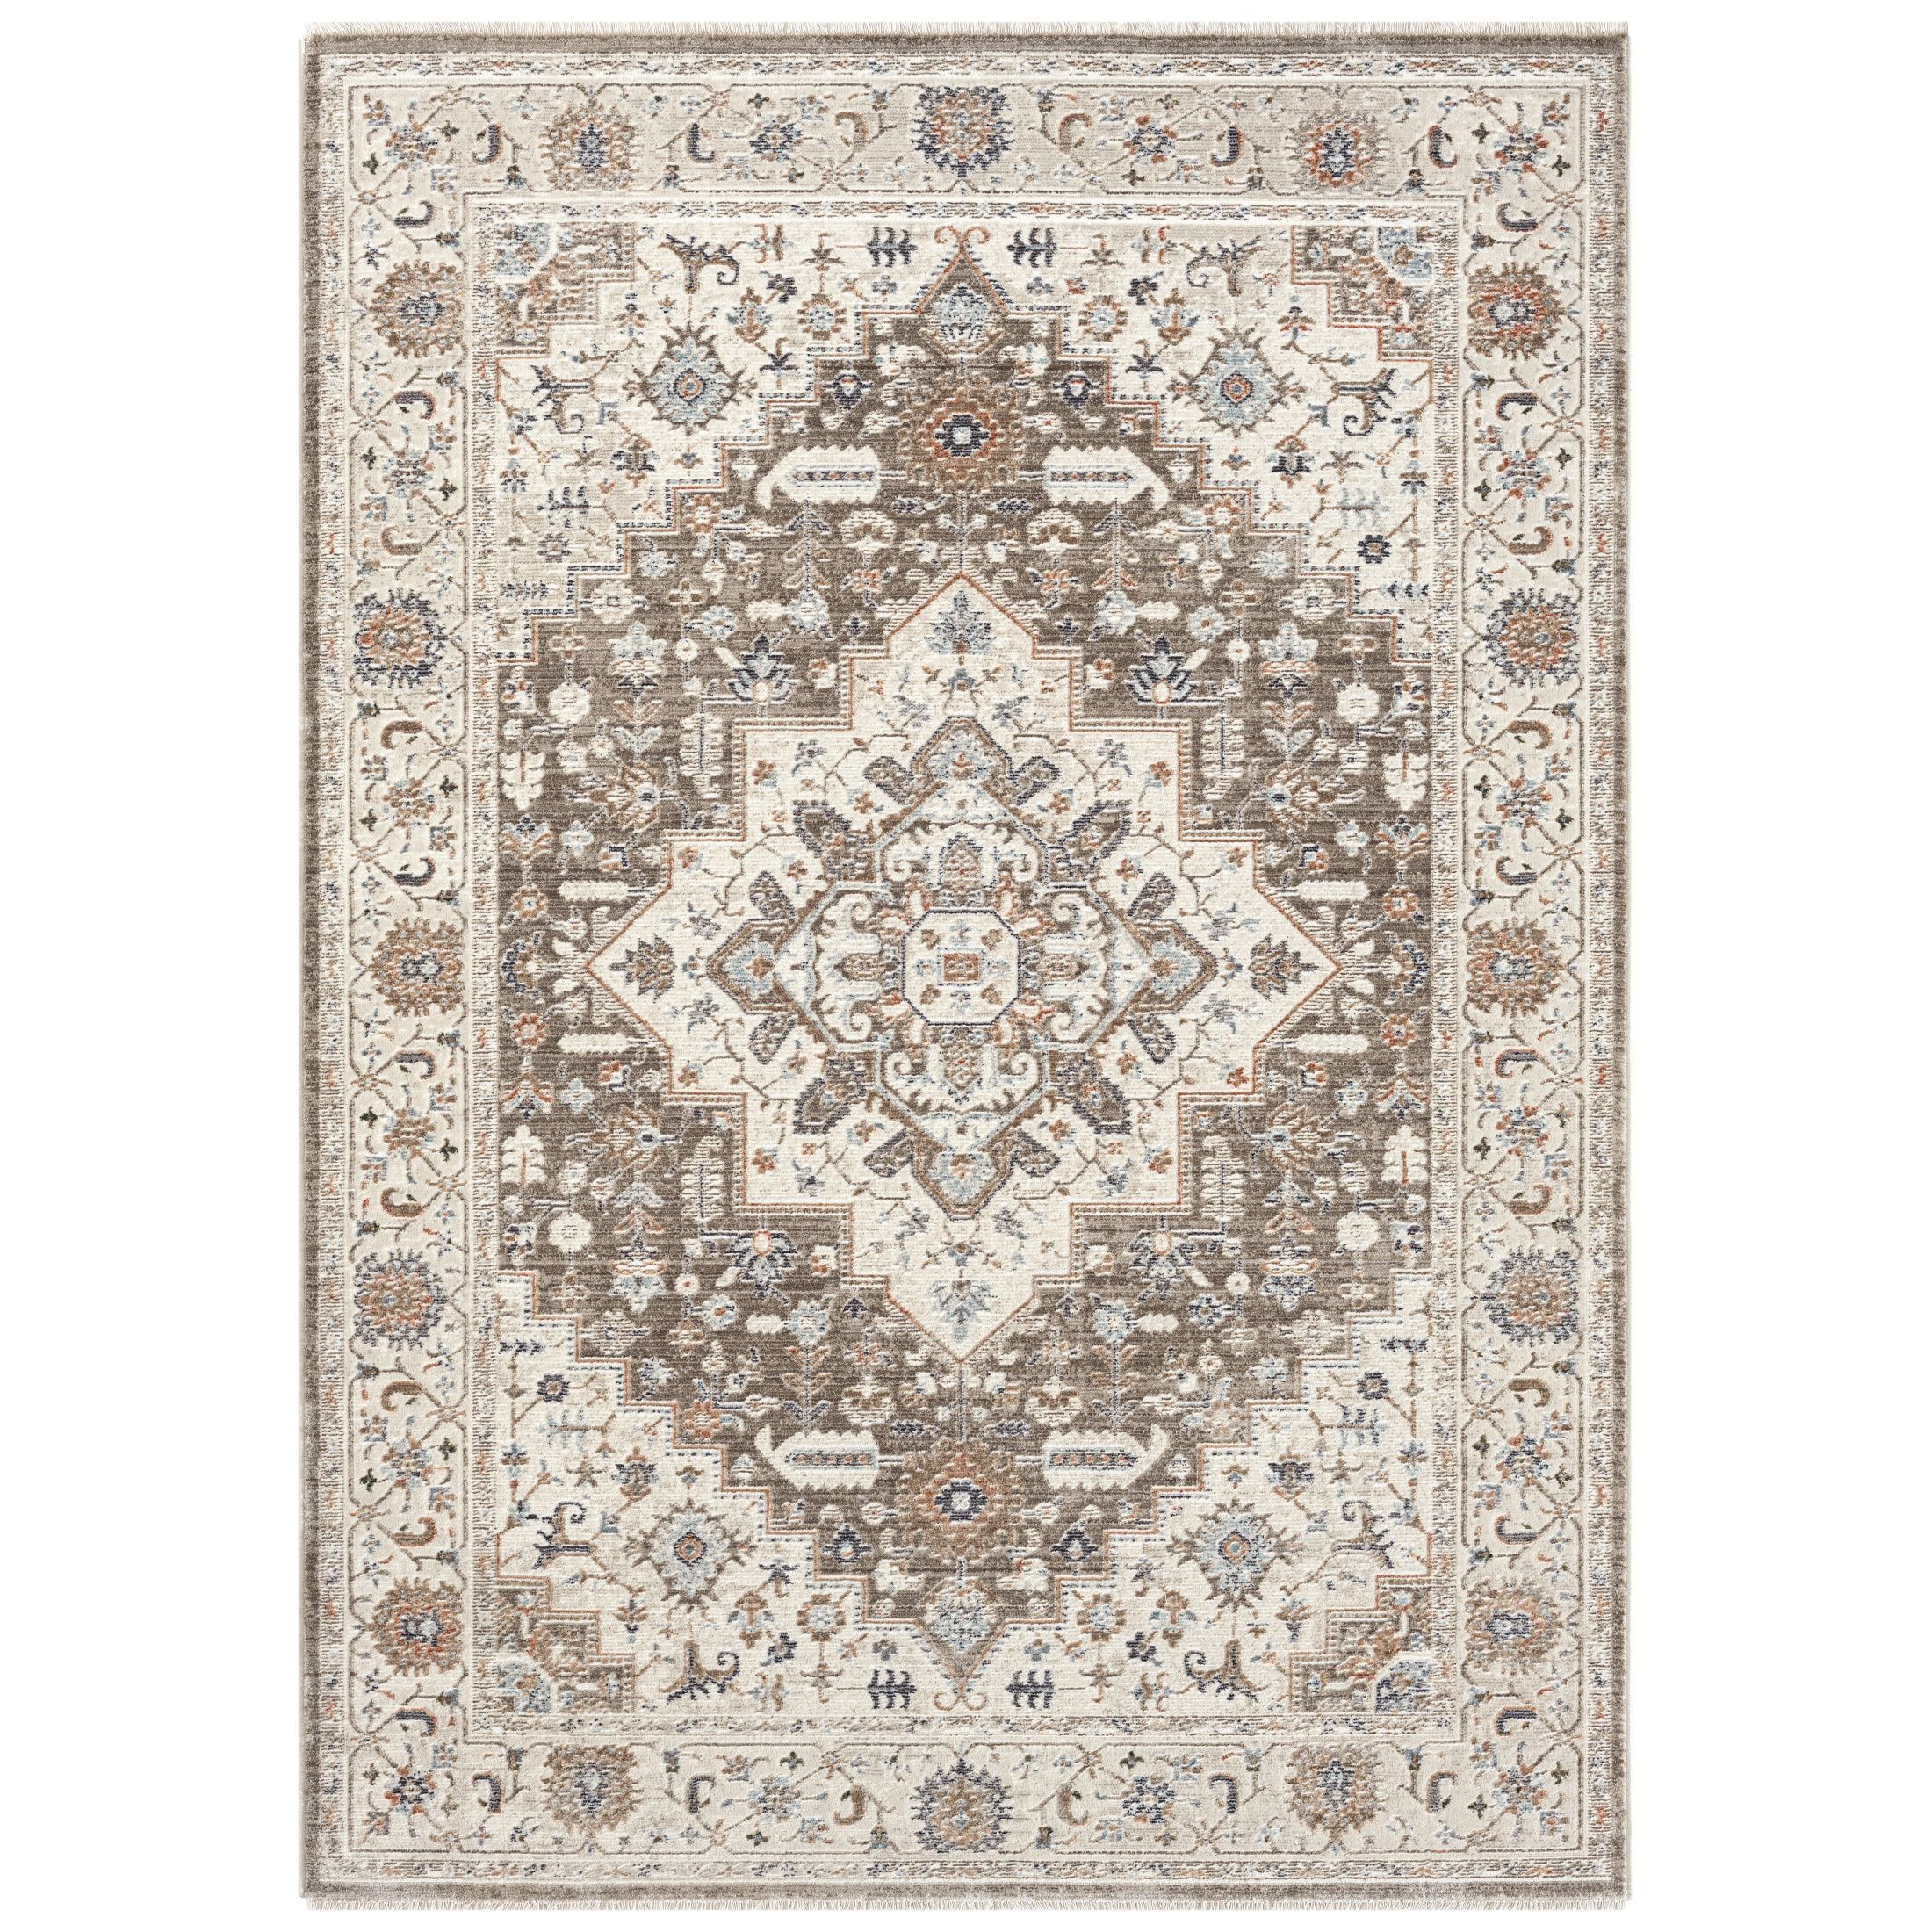 Better Homes and Gardens Medallion Area Rug, Multicolor, 5'x7'2" | Walmart (US)